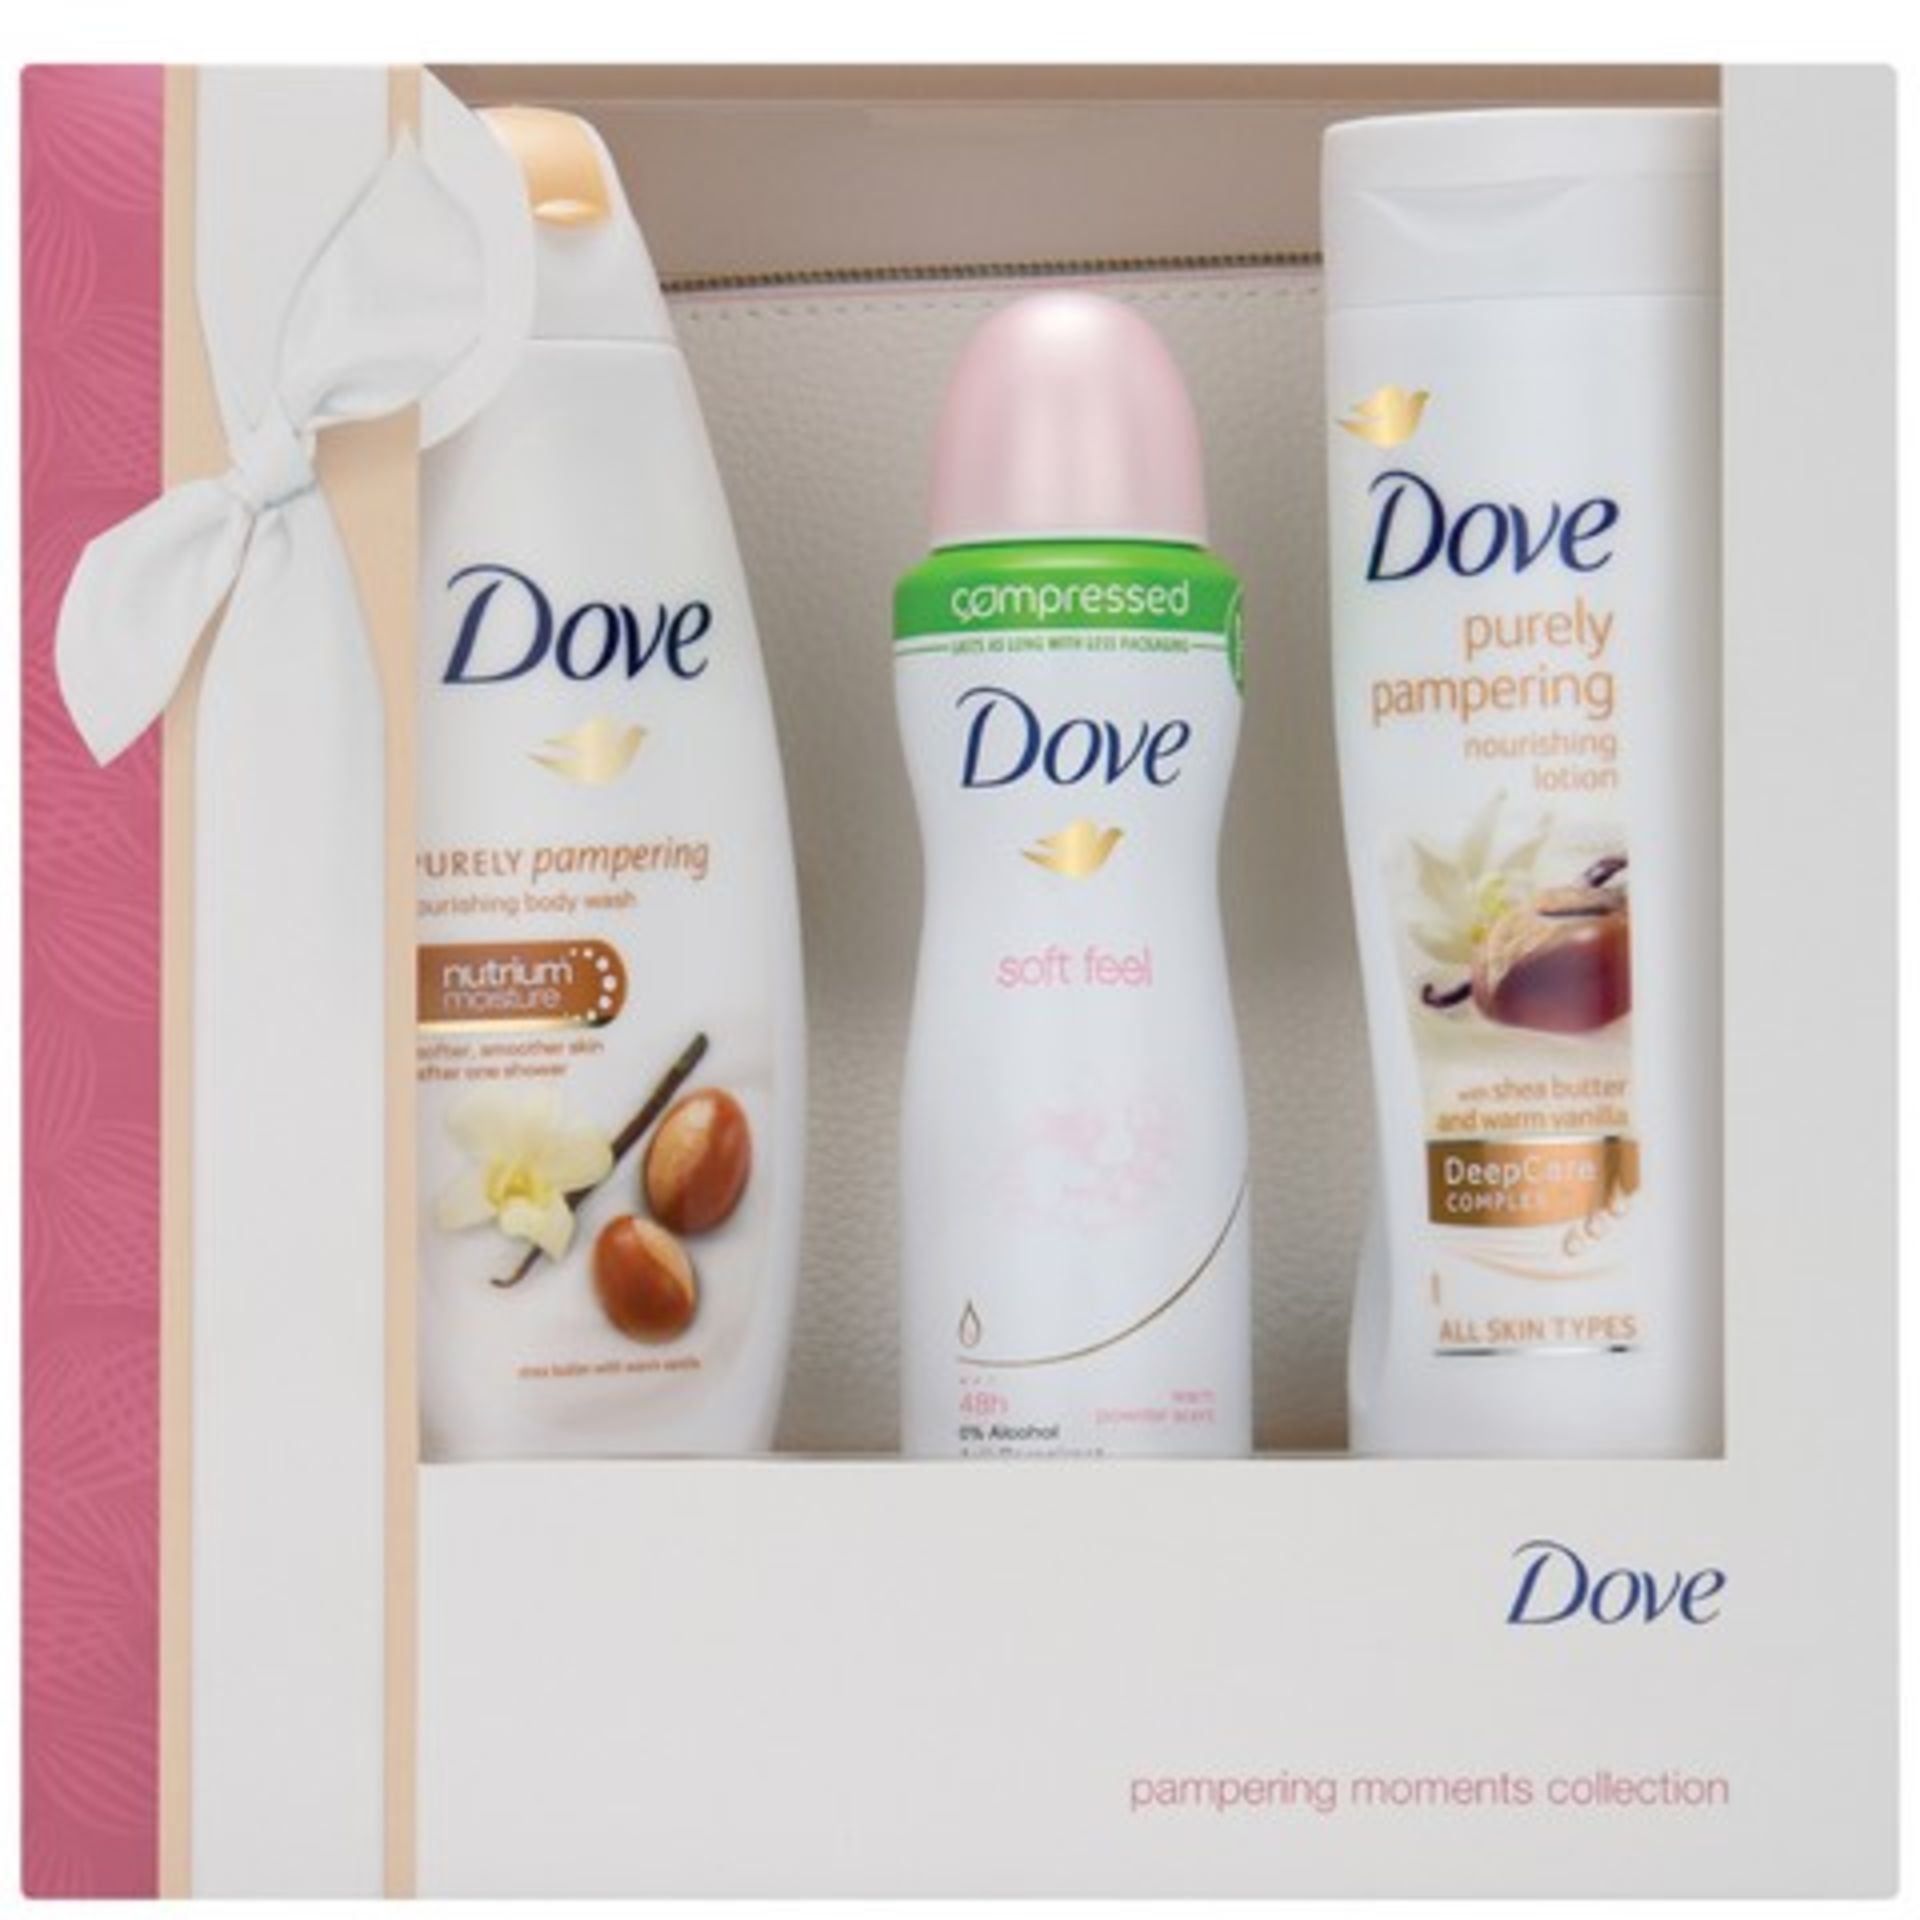 + VAT Brand New Dove Pampering Moments Trio & Washbag Set Includes 3 Full-Size Dove Products - Image 3 of 3